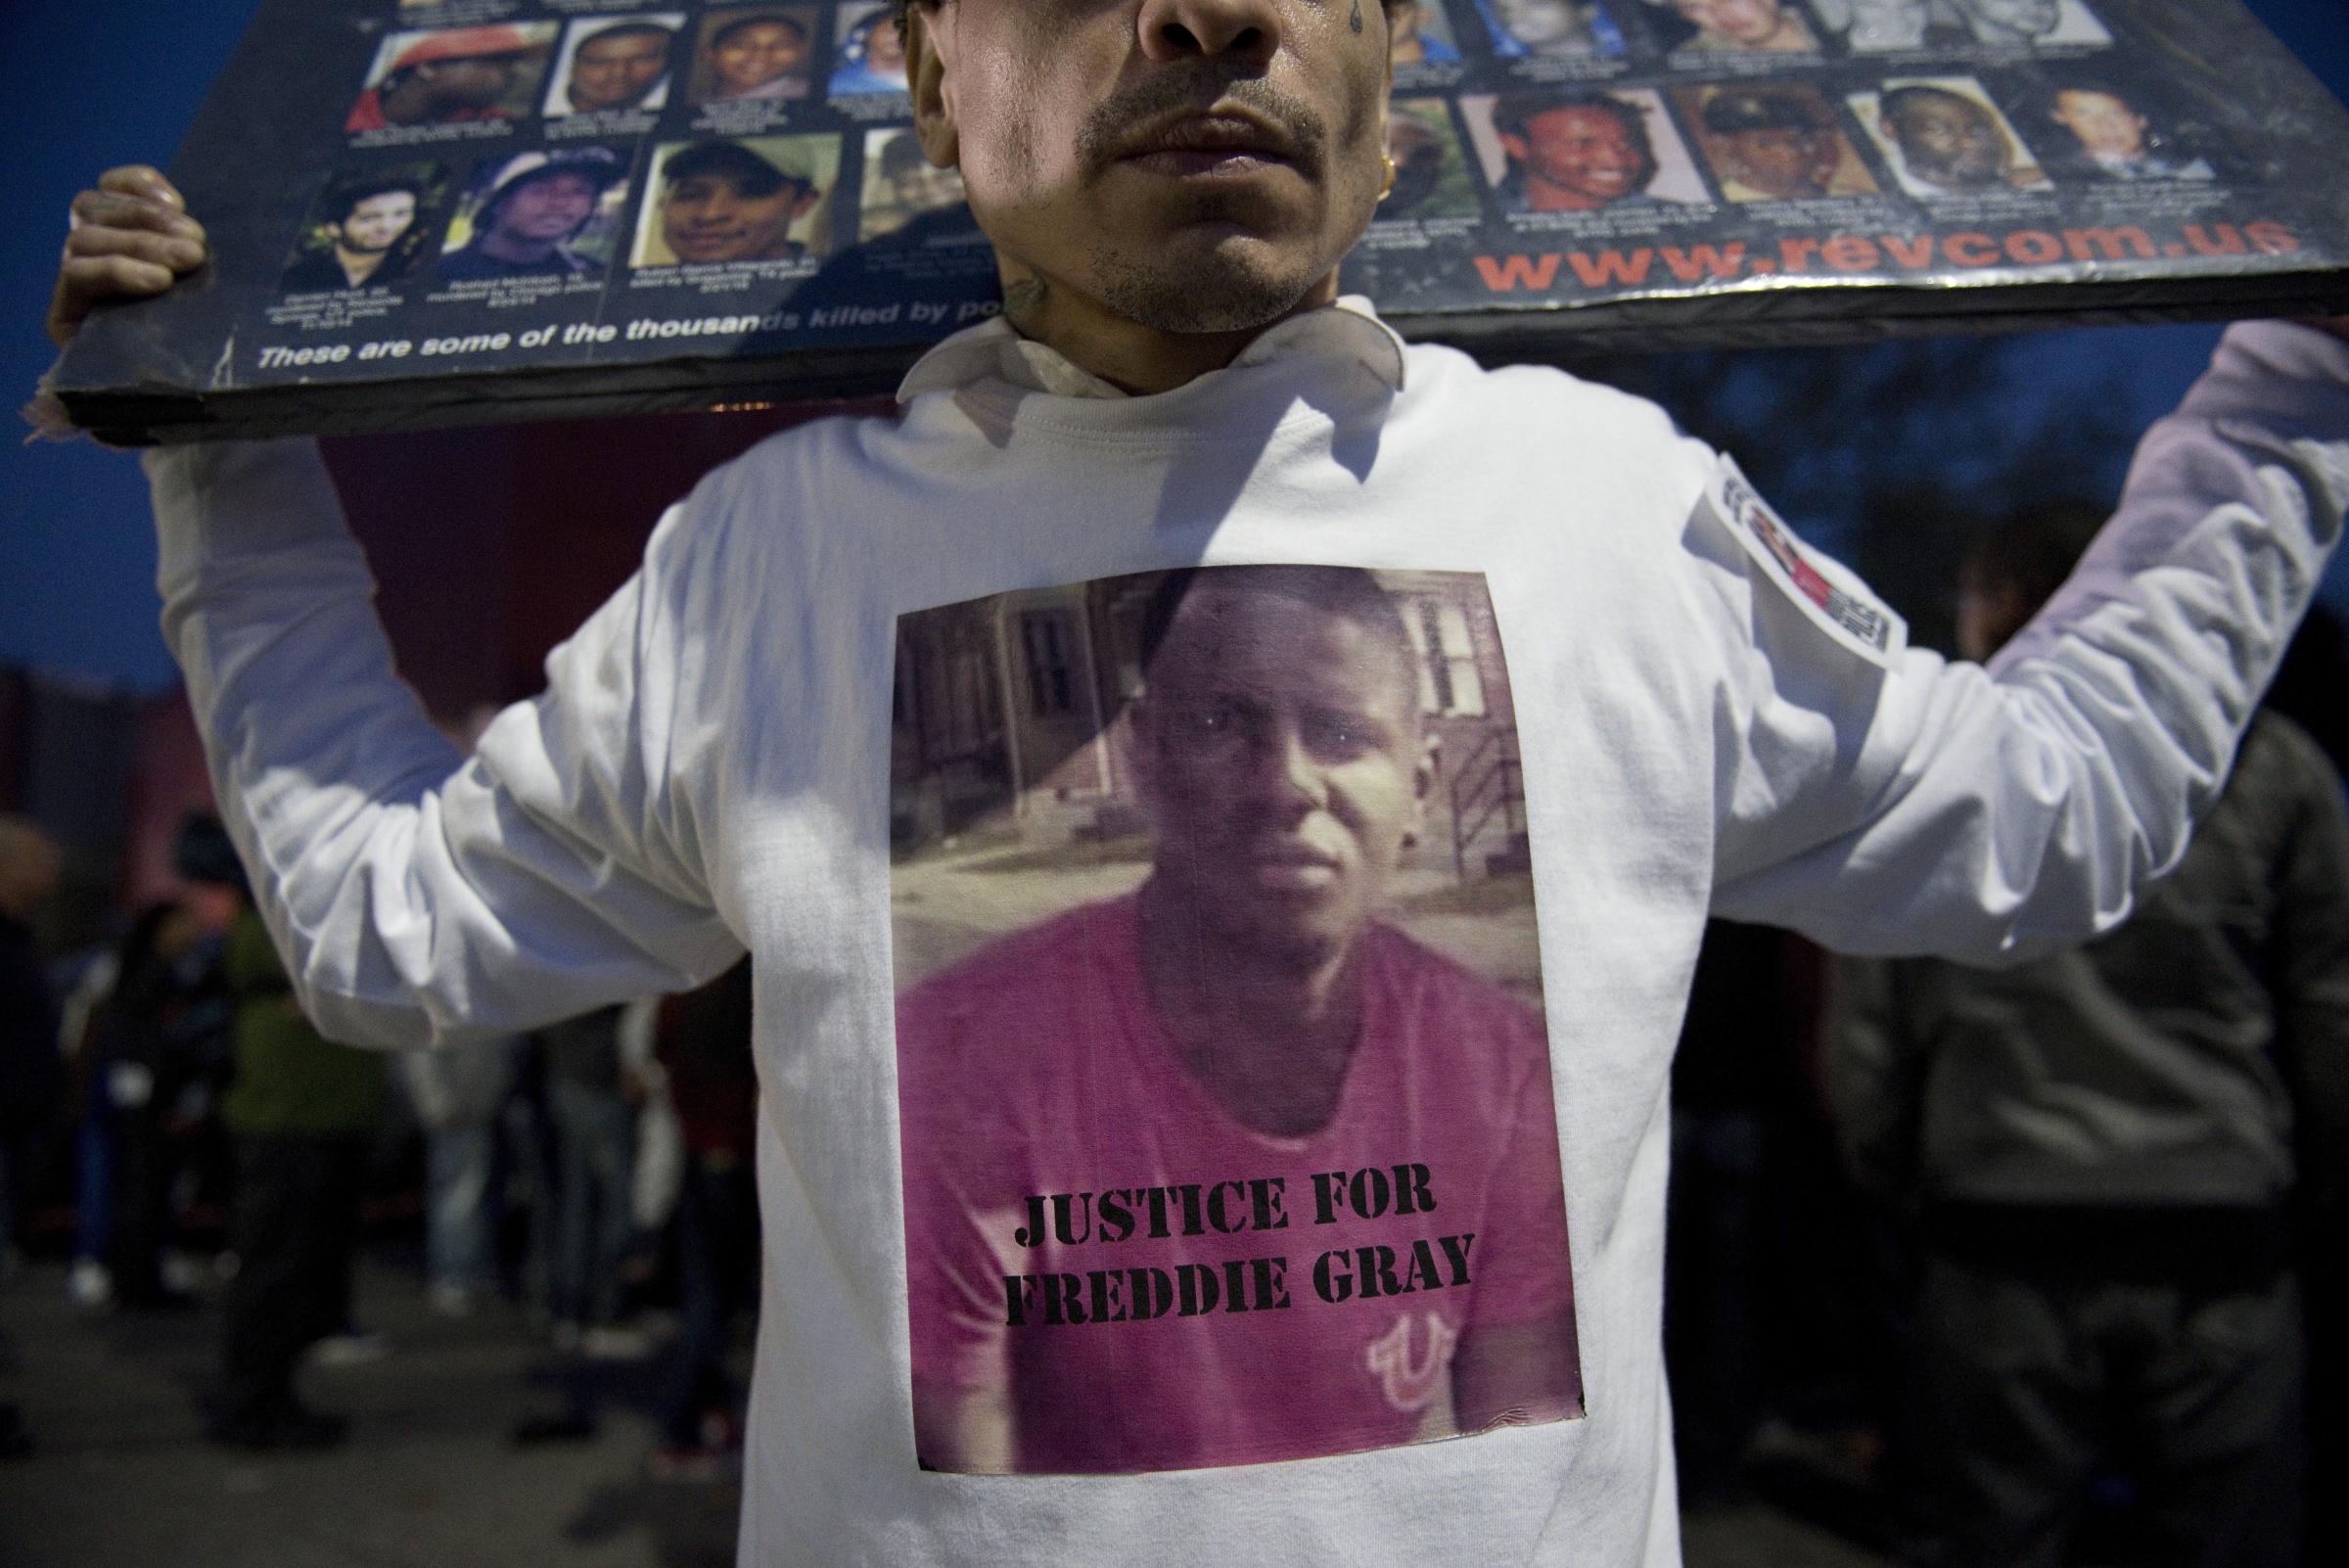 USA - Protesters rally over death of Freddie Gray in Baltimore